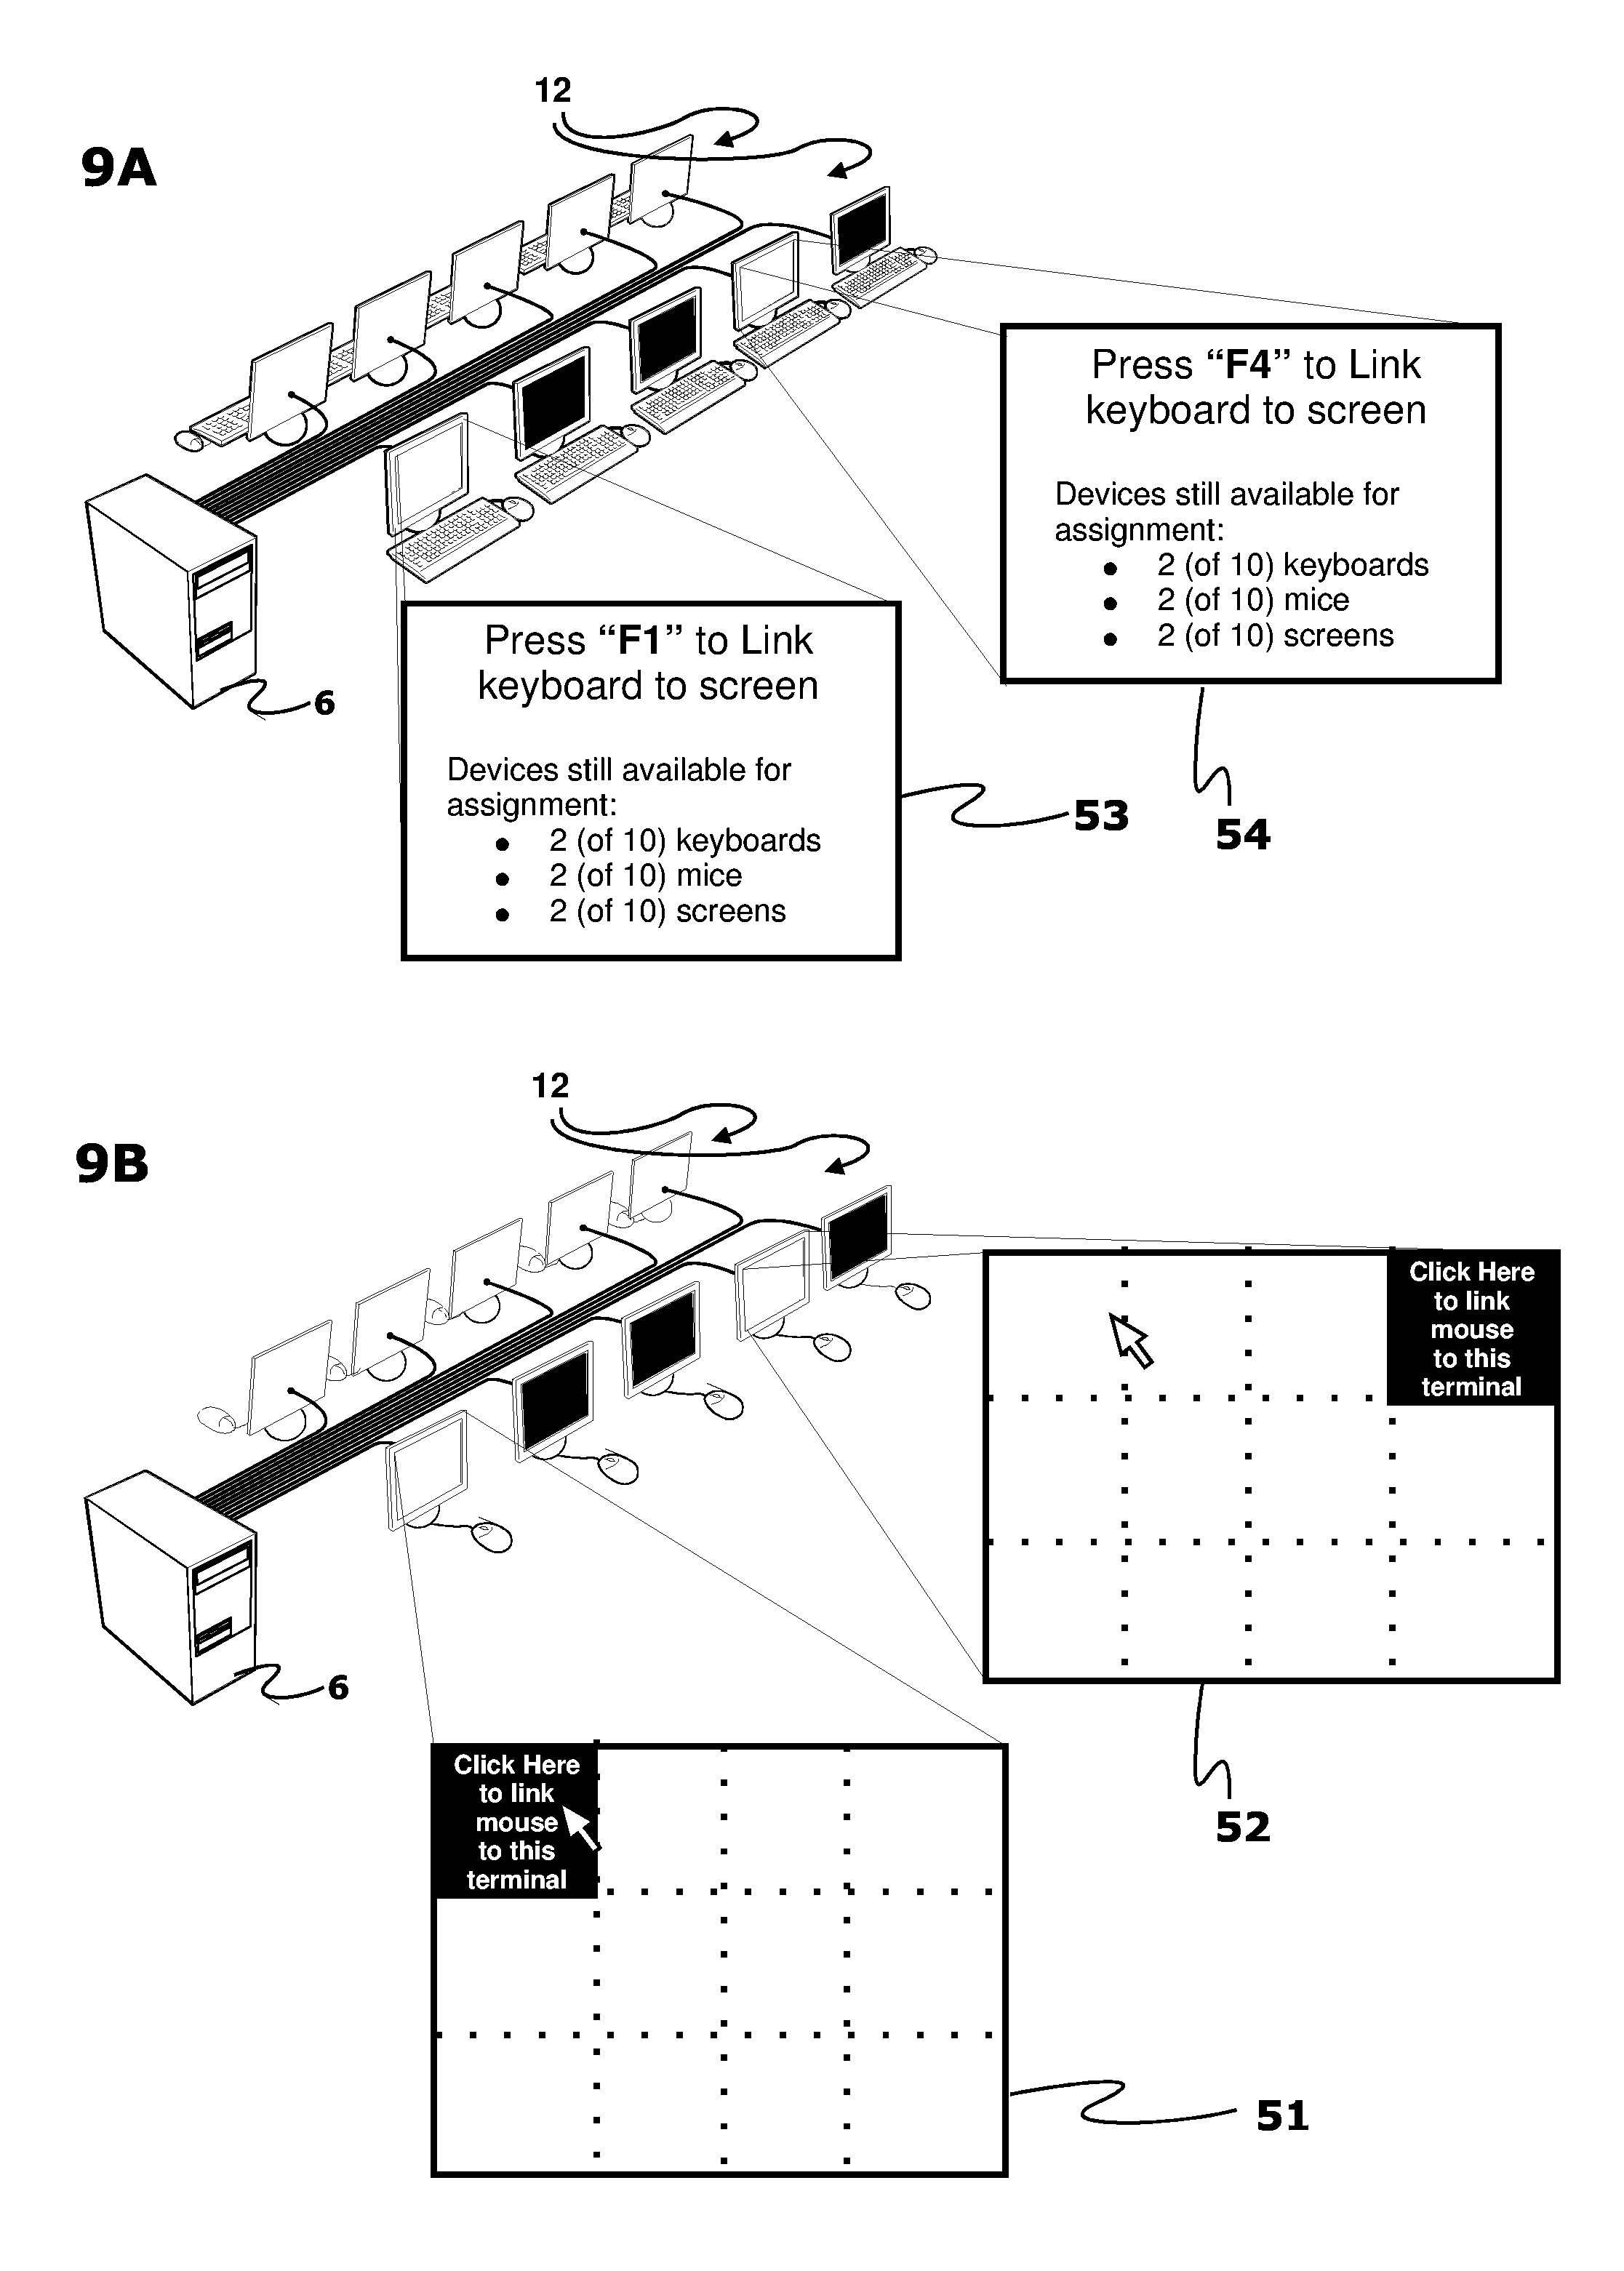 Method of operating multiple input and output devices through a single computer